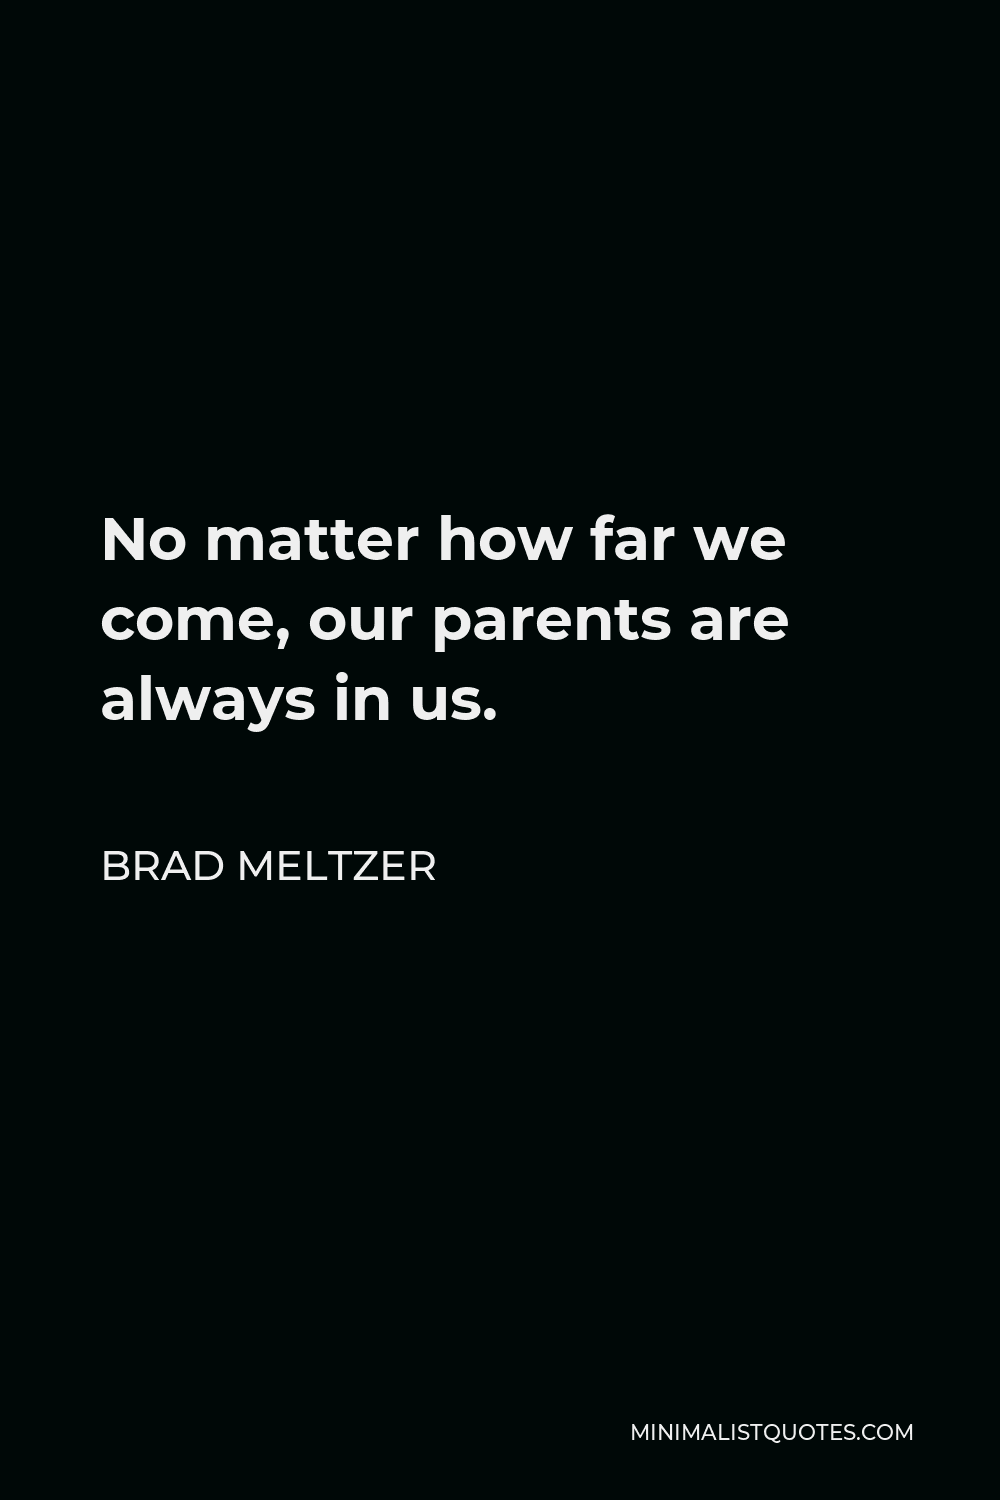 Brad Meltzer Quote - No matter how far we come, our parents are always in us.